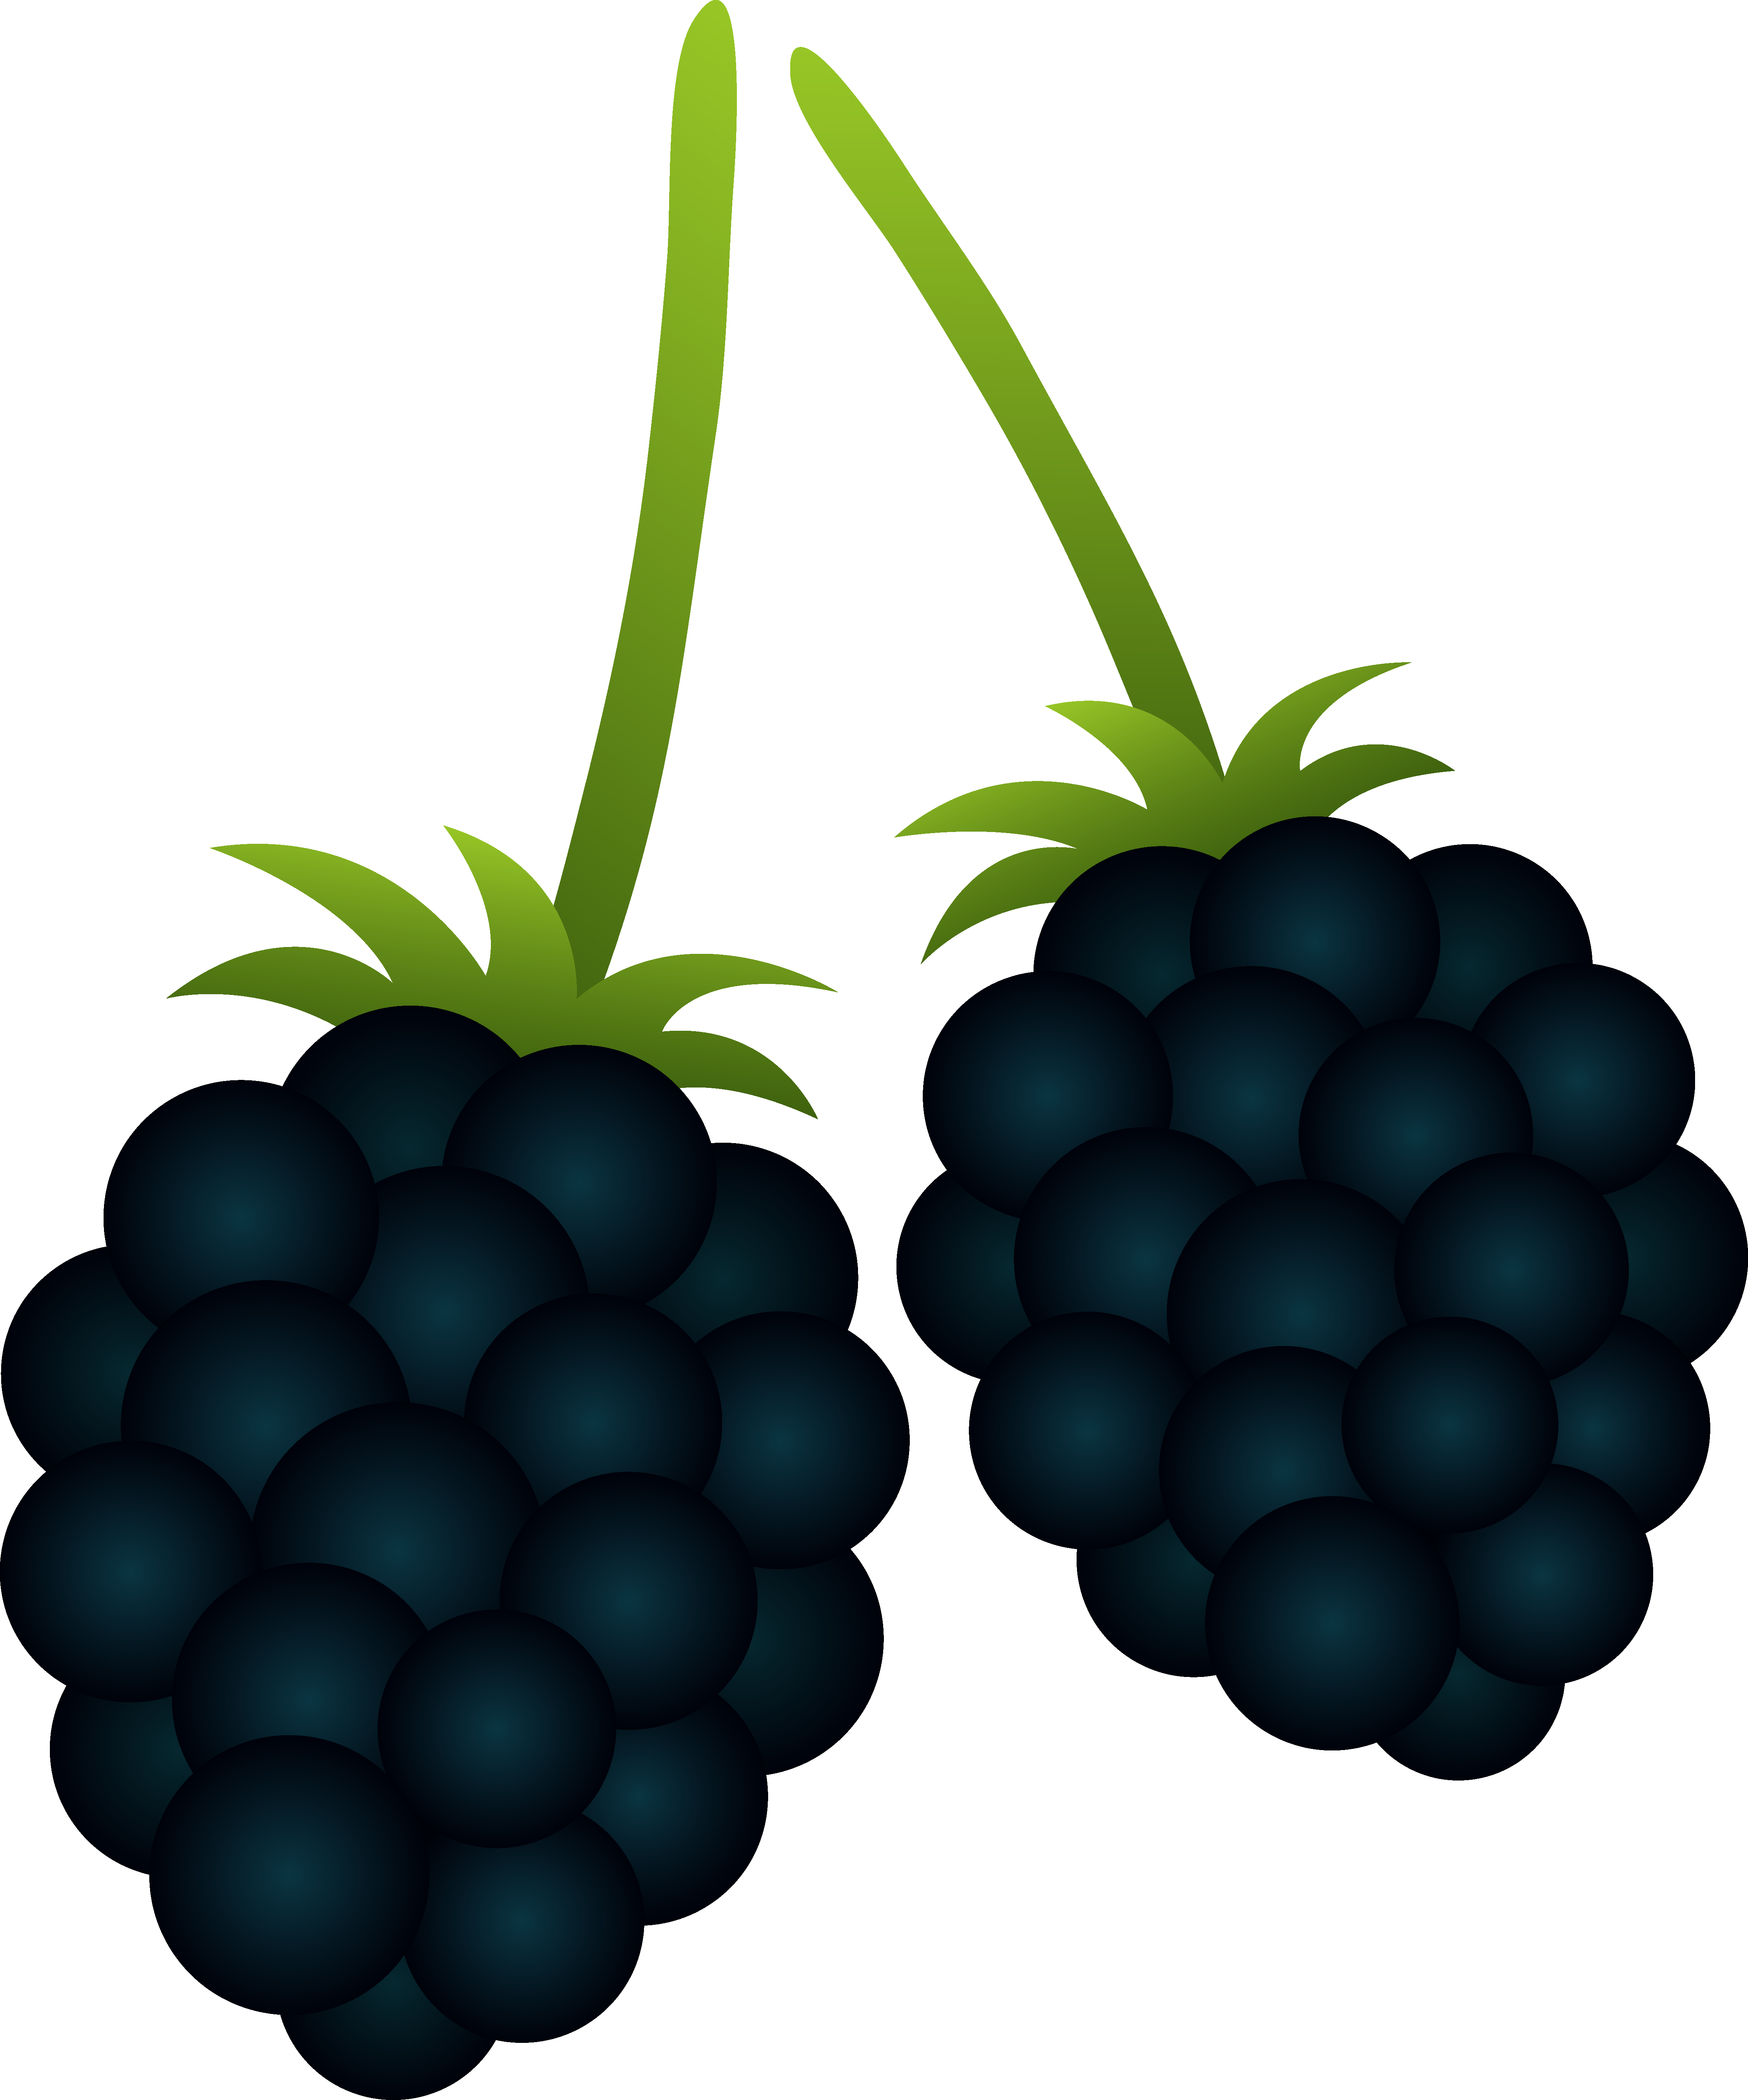 download clipart for blackberry - photo #7